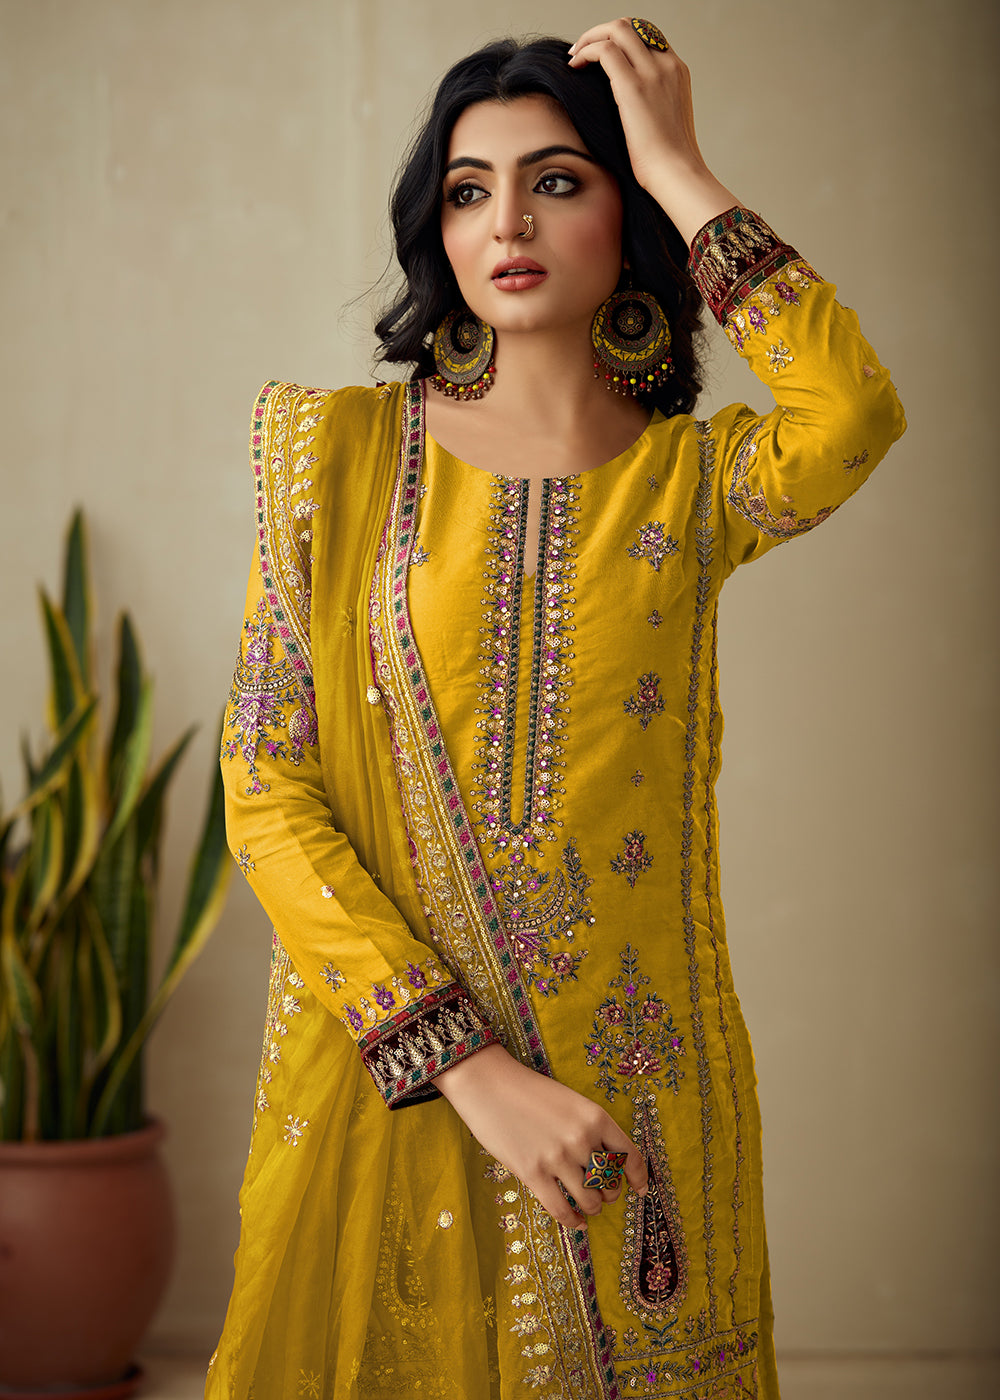 Buy Now Bright Yellow Organza Embroidered Traditional Salwar Kameez Online in USA, UK, Canada, Germany, Australia & Worldwide at Empress Clothing. 